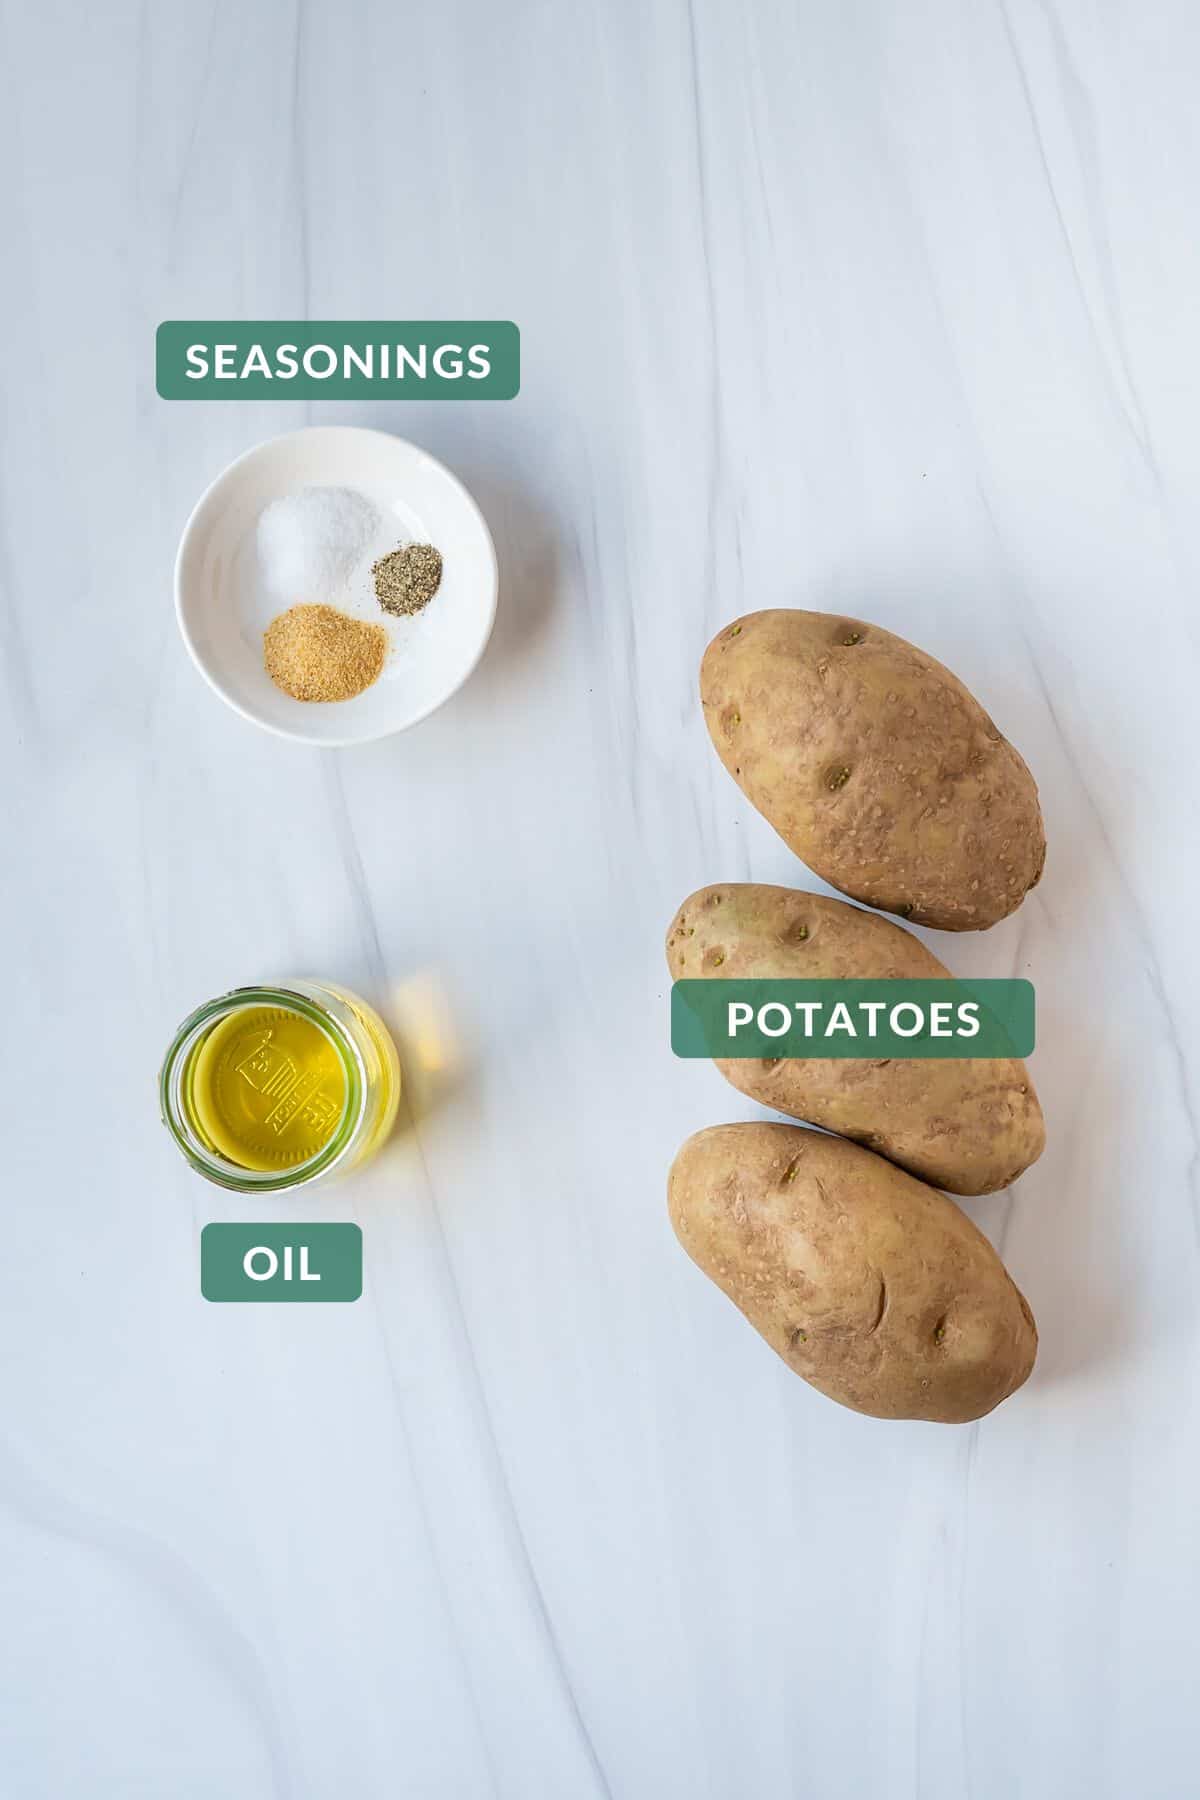 The three ingredients you need to make cottage fries: potatoes, seasonings, and oil.